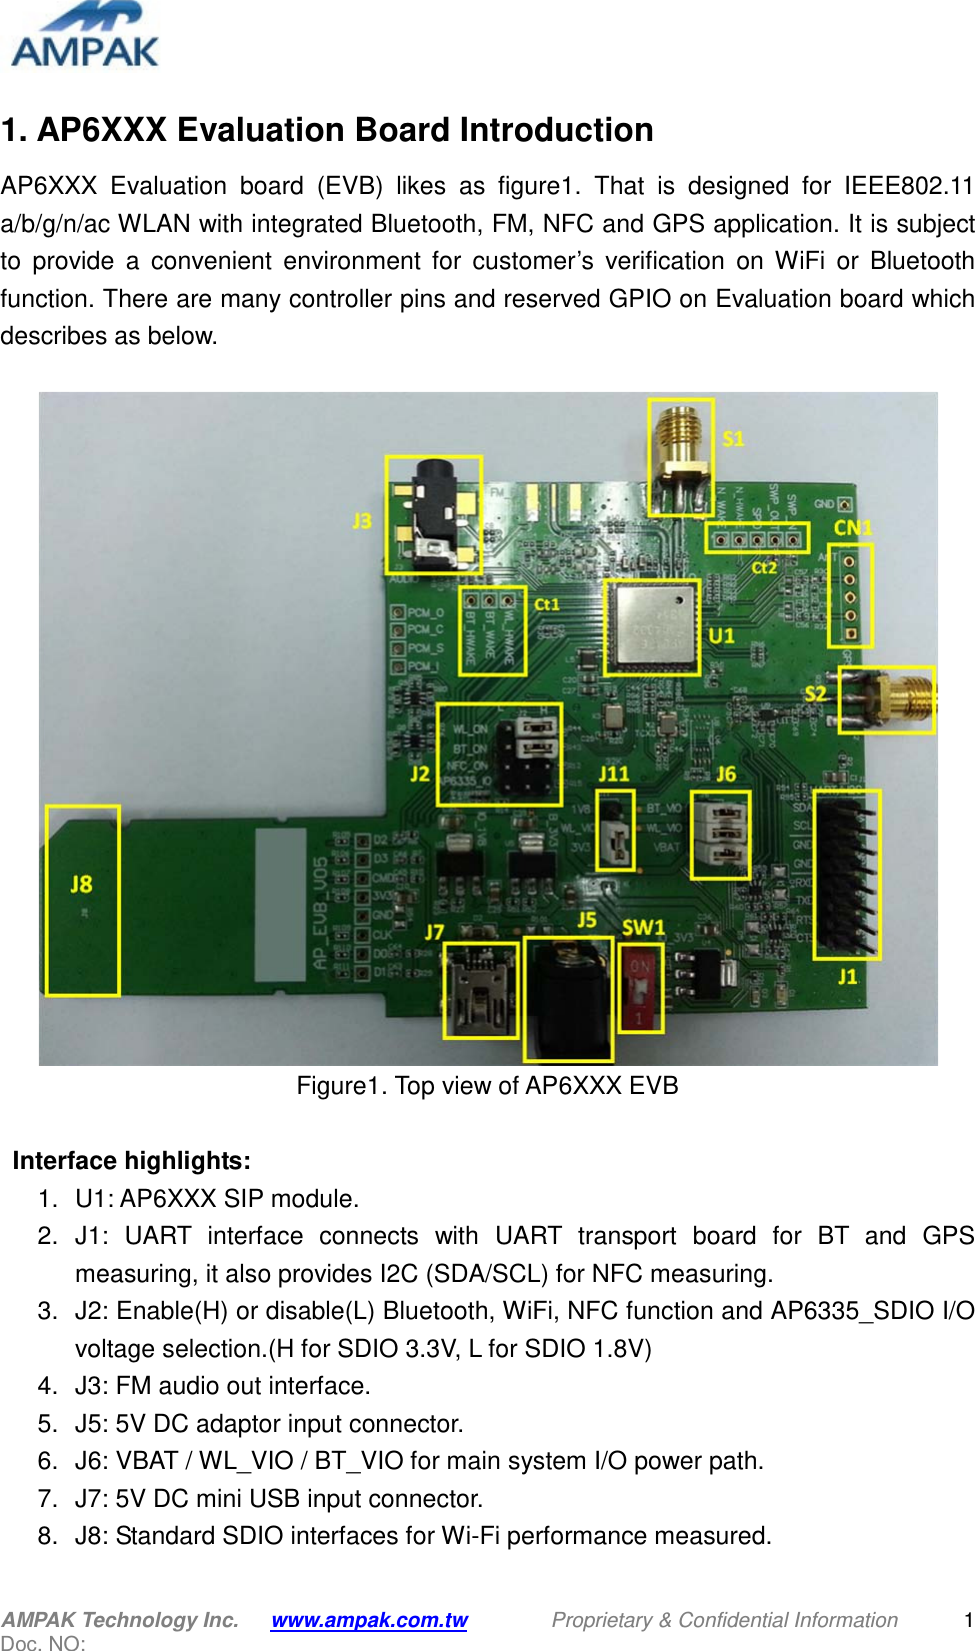  AMPAK Technology Inc.   www.ampak.com.tw        Proprietary &amp; Confidential Information   Doc. NO:   1 1. AP6XXX Evaluation Board Introduction AP6XXX Evaluation board (EVB) likes as figure1. That is designed for IEEE802.11 a/b/g/n/ac WLAN with integrated Bluetooth, FM, NFC and GPS application. It is subject to provide a convenient environment for customer’s verification on WiFi or Bluetooth function. There are many controller pins and reserved GPIO on Evaluation board which describes as below.   Figure1. Top view of AP6XXX EVB   Interface highlights: 1.  U1: AP6XXX SIP module. 2. J1: UART interface connects with UART transport board for BT and GPS measuring, it also provides I2C (SDA/SCL) for NFC measuring. 3. J2: Enable(H) or disable(L) Bluetooth, WiFi, NFC function and AP6335_SDIO I/O voltage selection.(H for SDIO 3.3V, L for SDIO 1.8V) 4.  J3: FM audio out interface. 5. J5: 5V DC adaptor input connector. 6. J6: VBAT / WL_VIO / BT_VIO for main system I/O power path. 7. J7: 5V DC mini USB input connector. 8.  J8: Standard SDIO interfaces for Wi-Fi performance measured. 